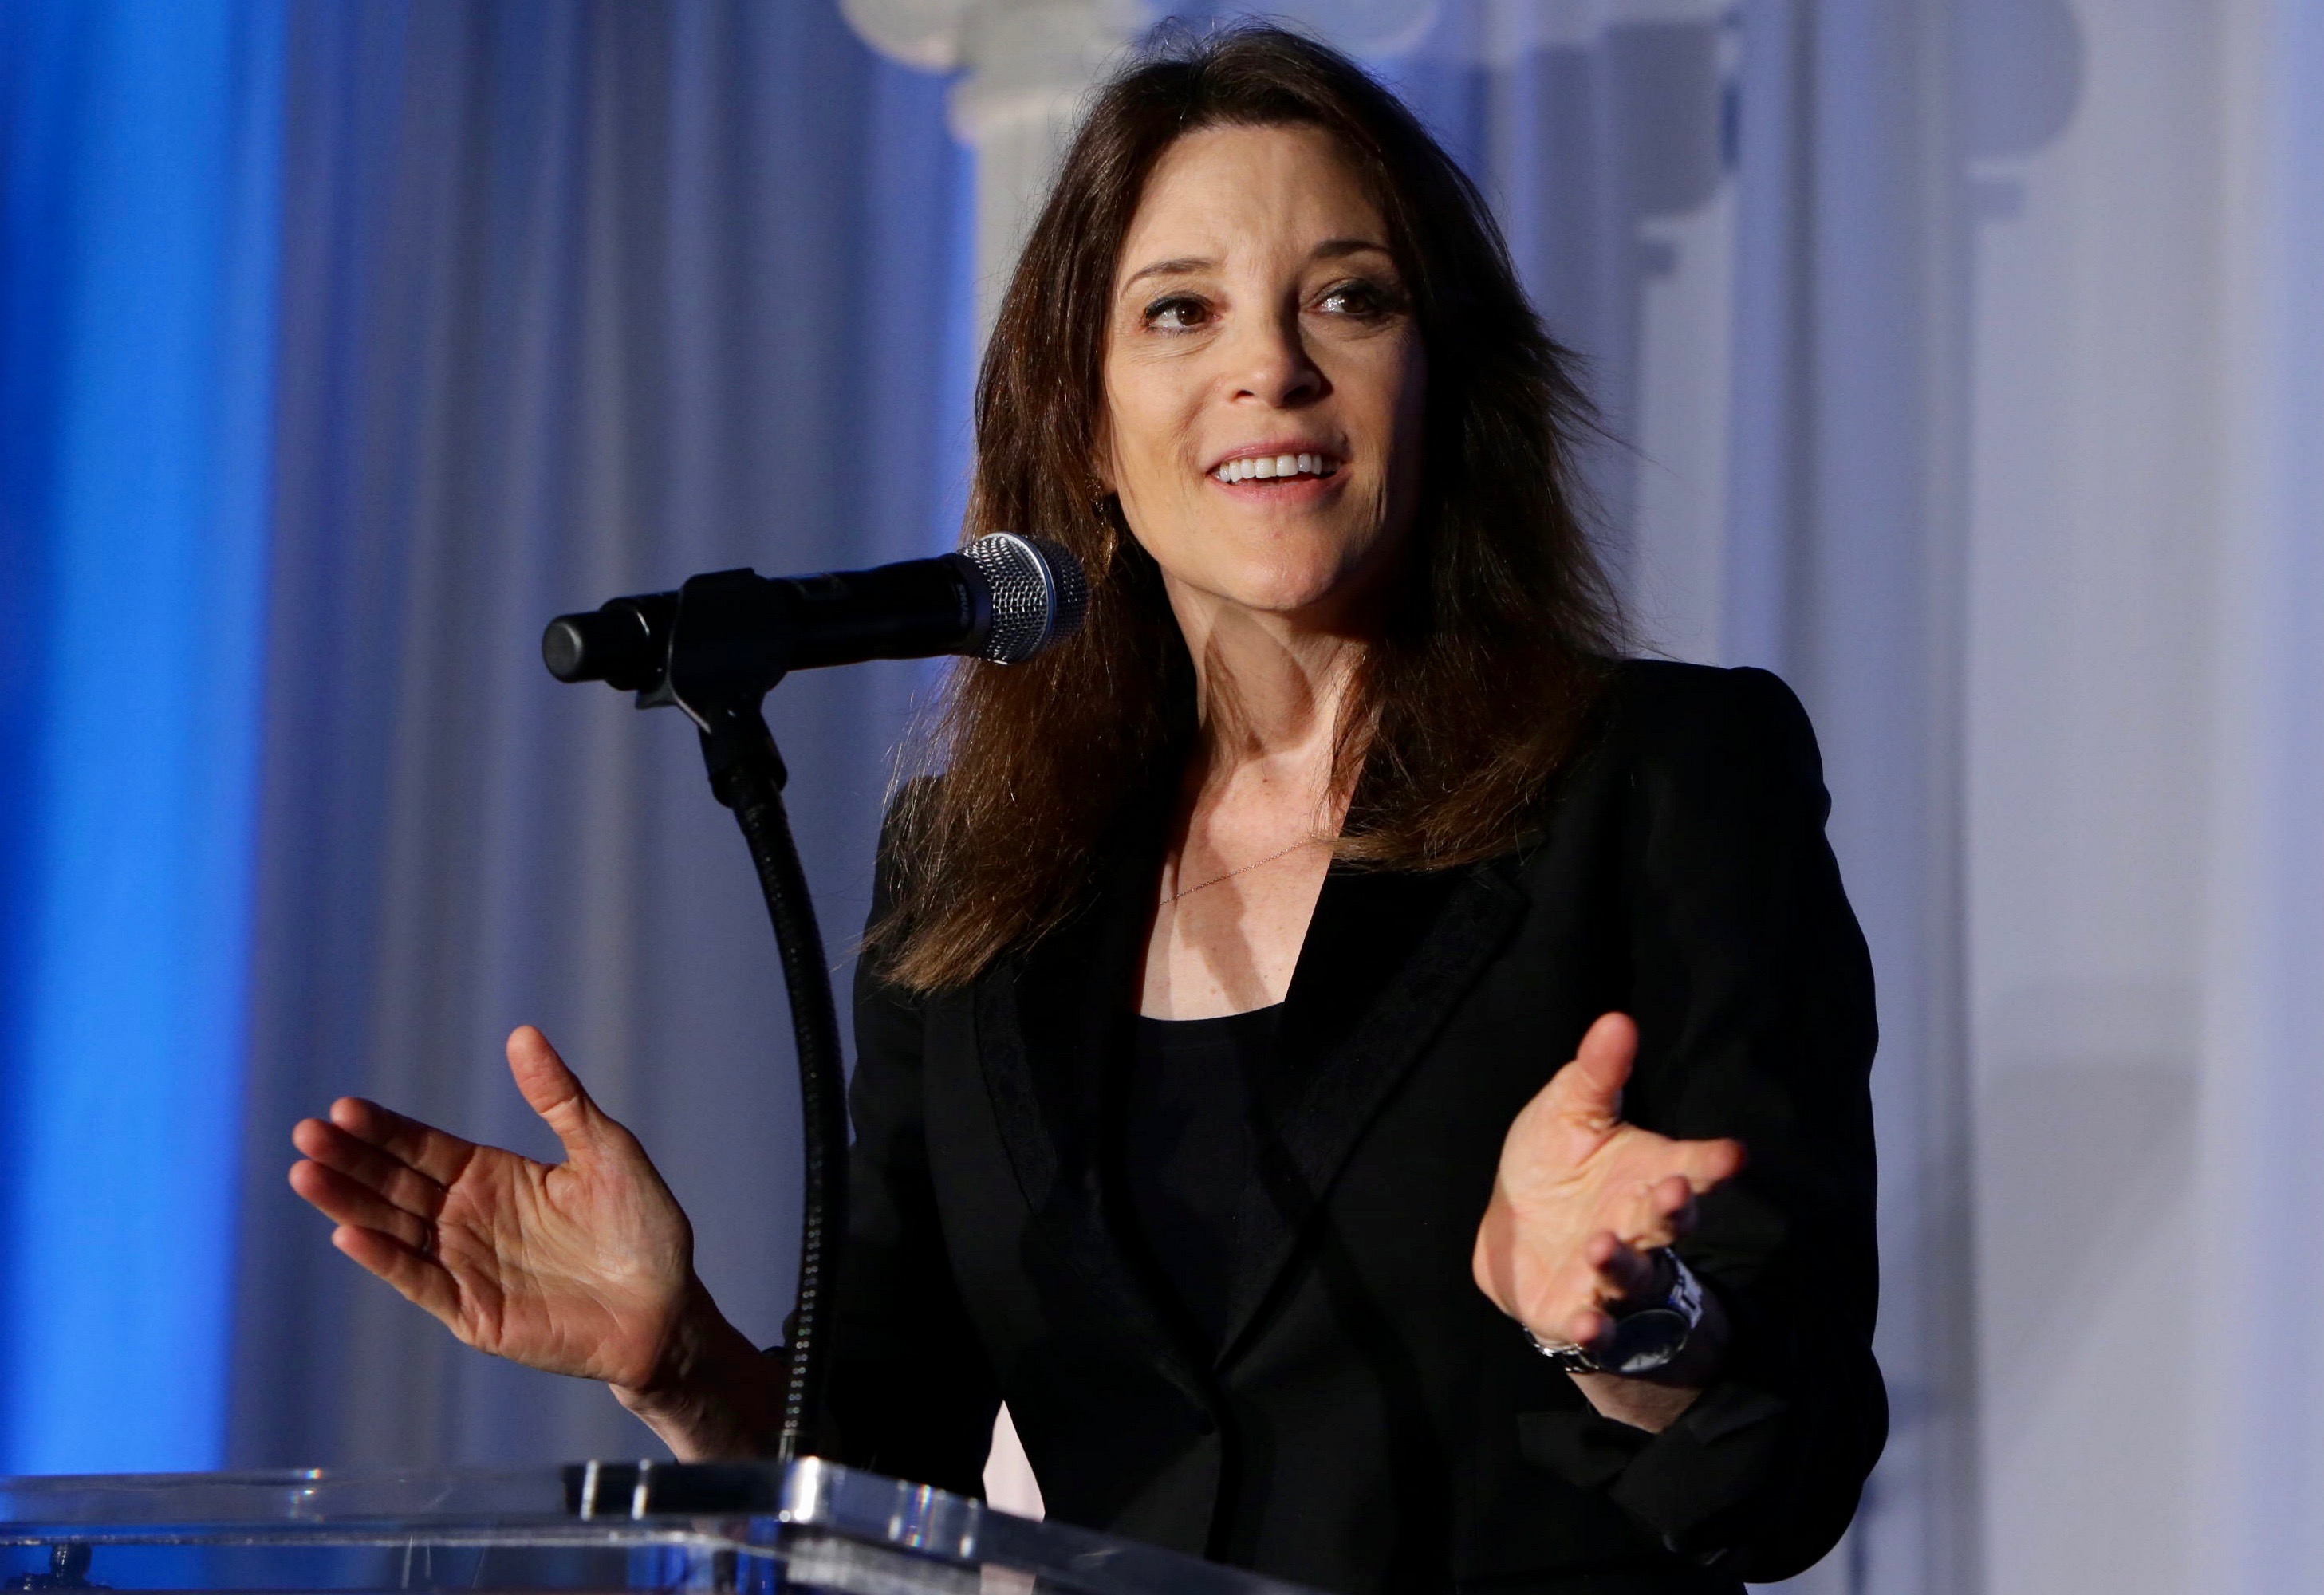 Marianne Williamson adds ‘meaning’ to Democratic presidential field